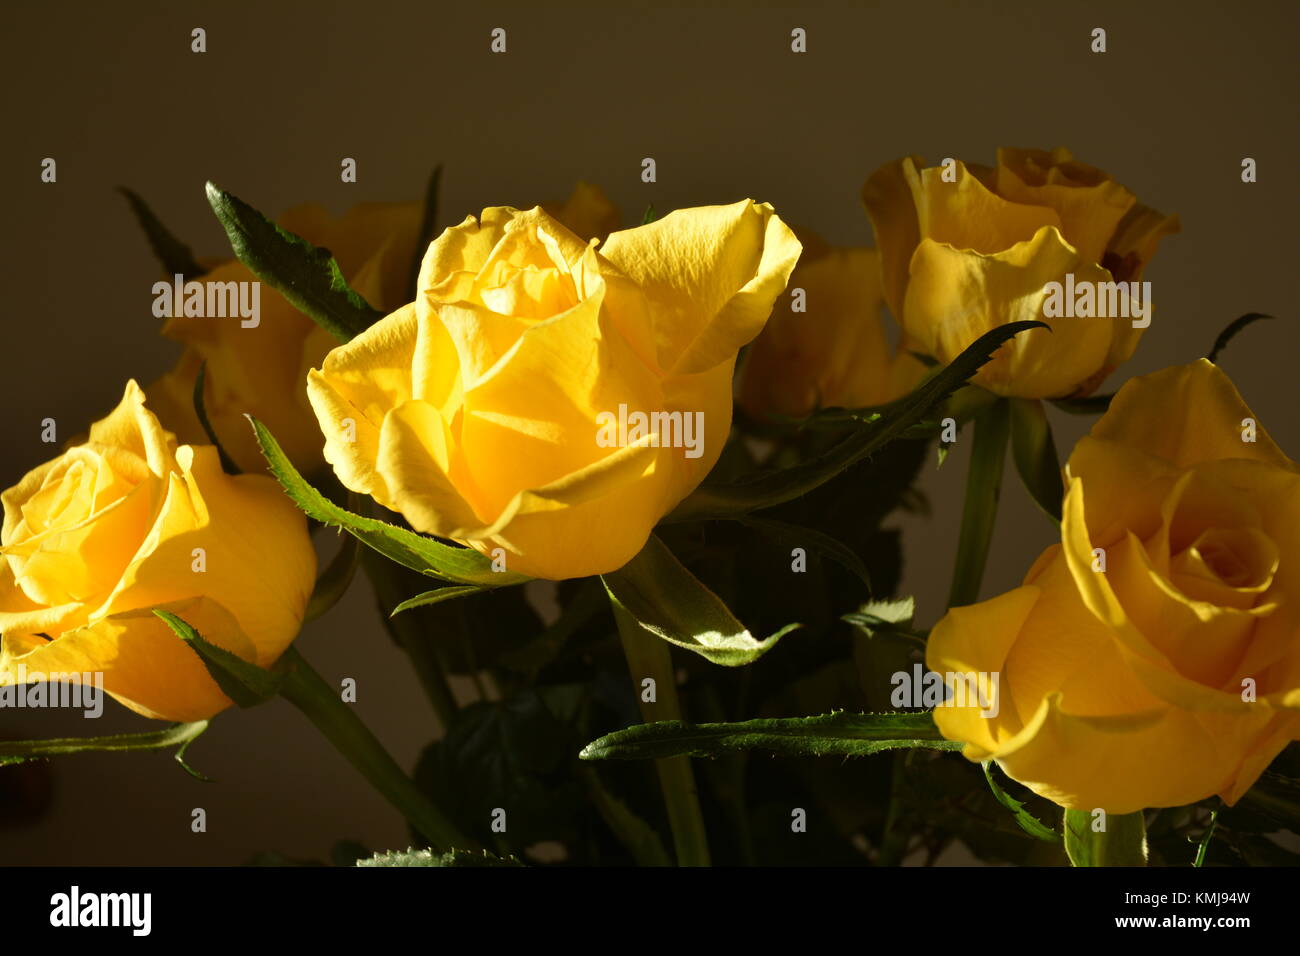 Bunch of yellow roses on dark background Stock Photo